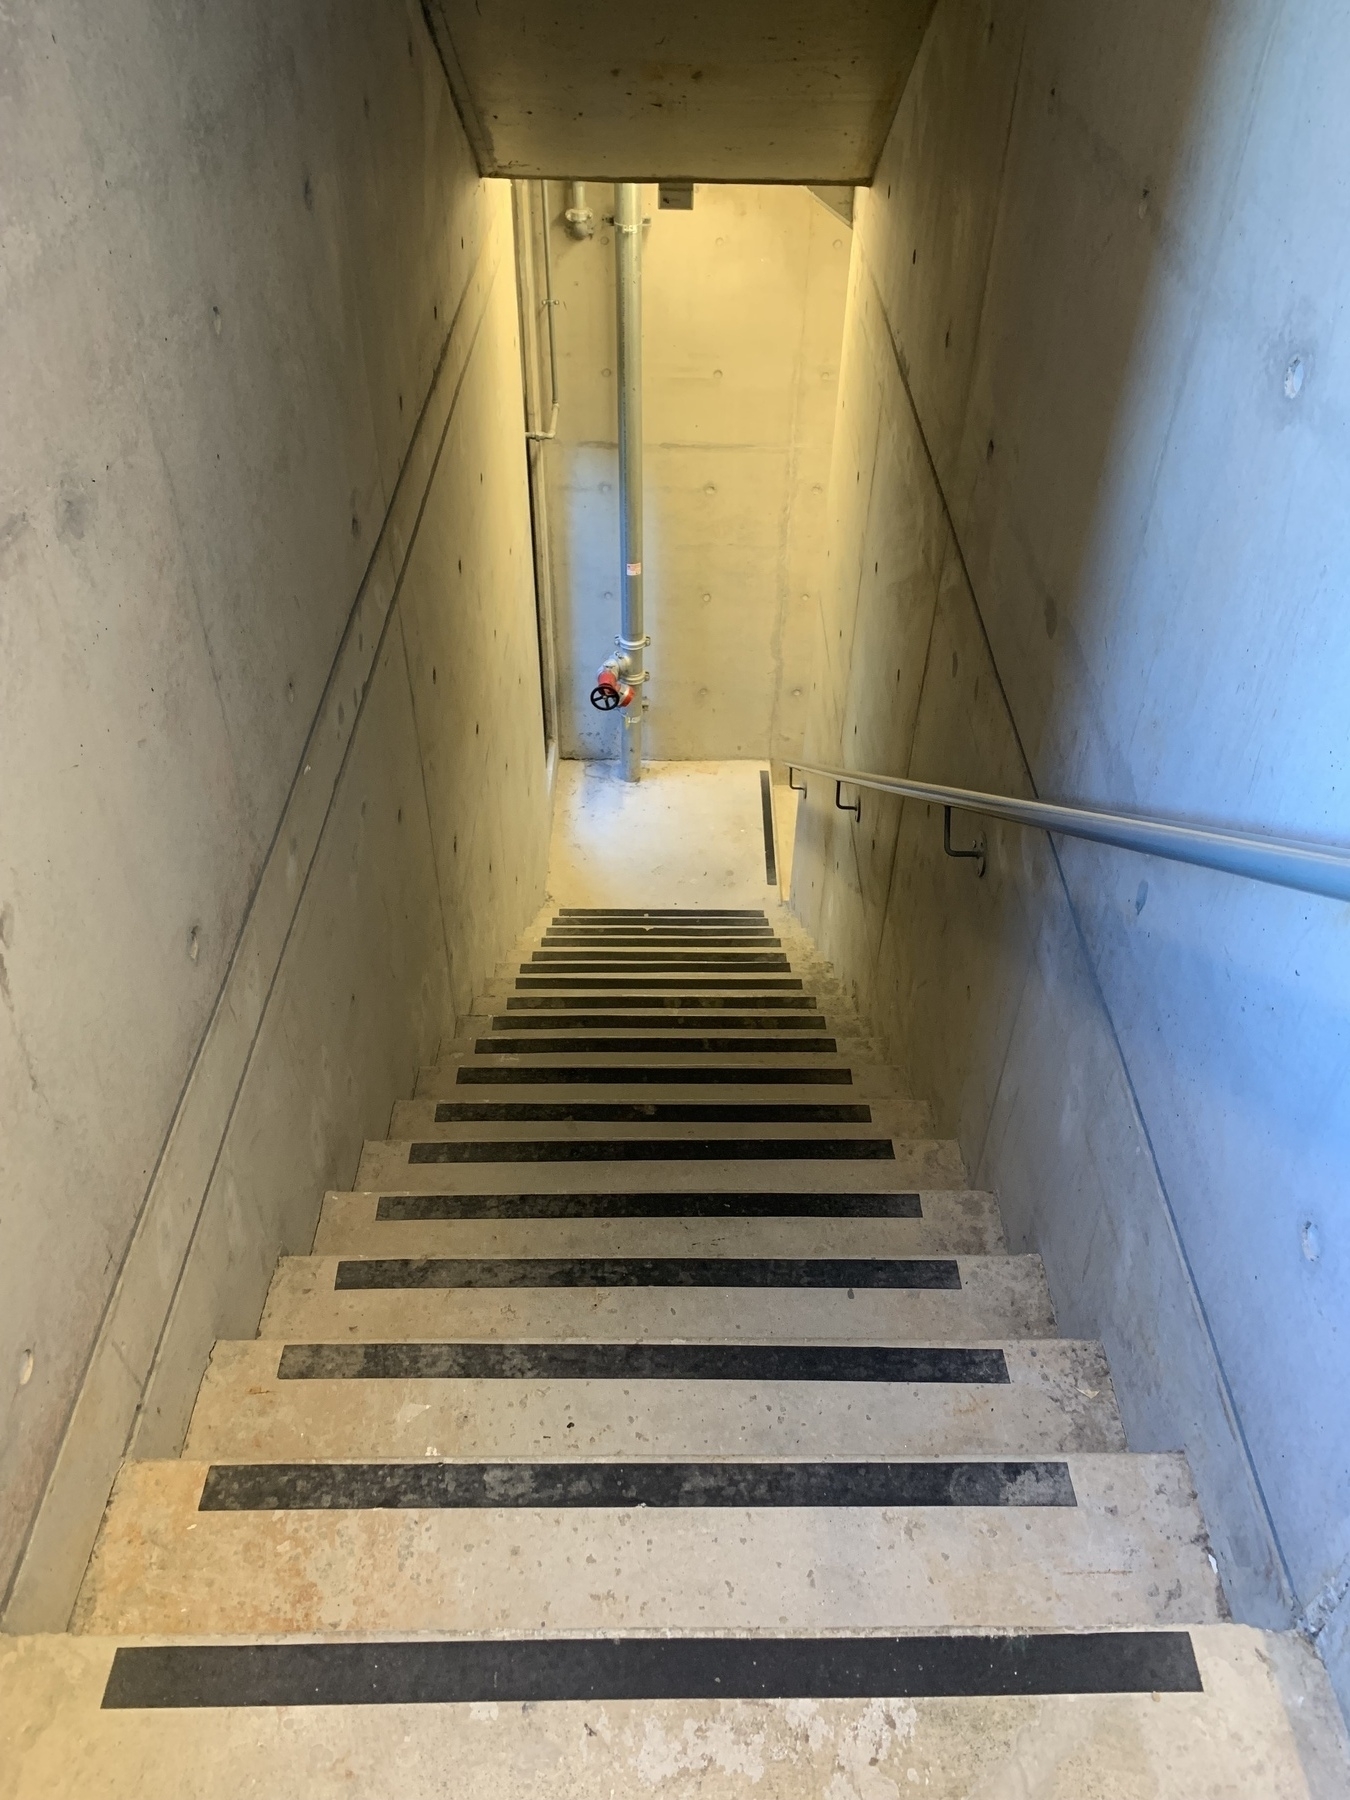 Looking down a flight of stairs with anti-slip grip strips, all within a concrete fire escape stairwell